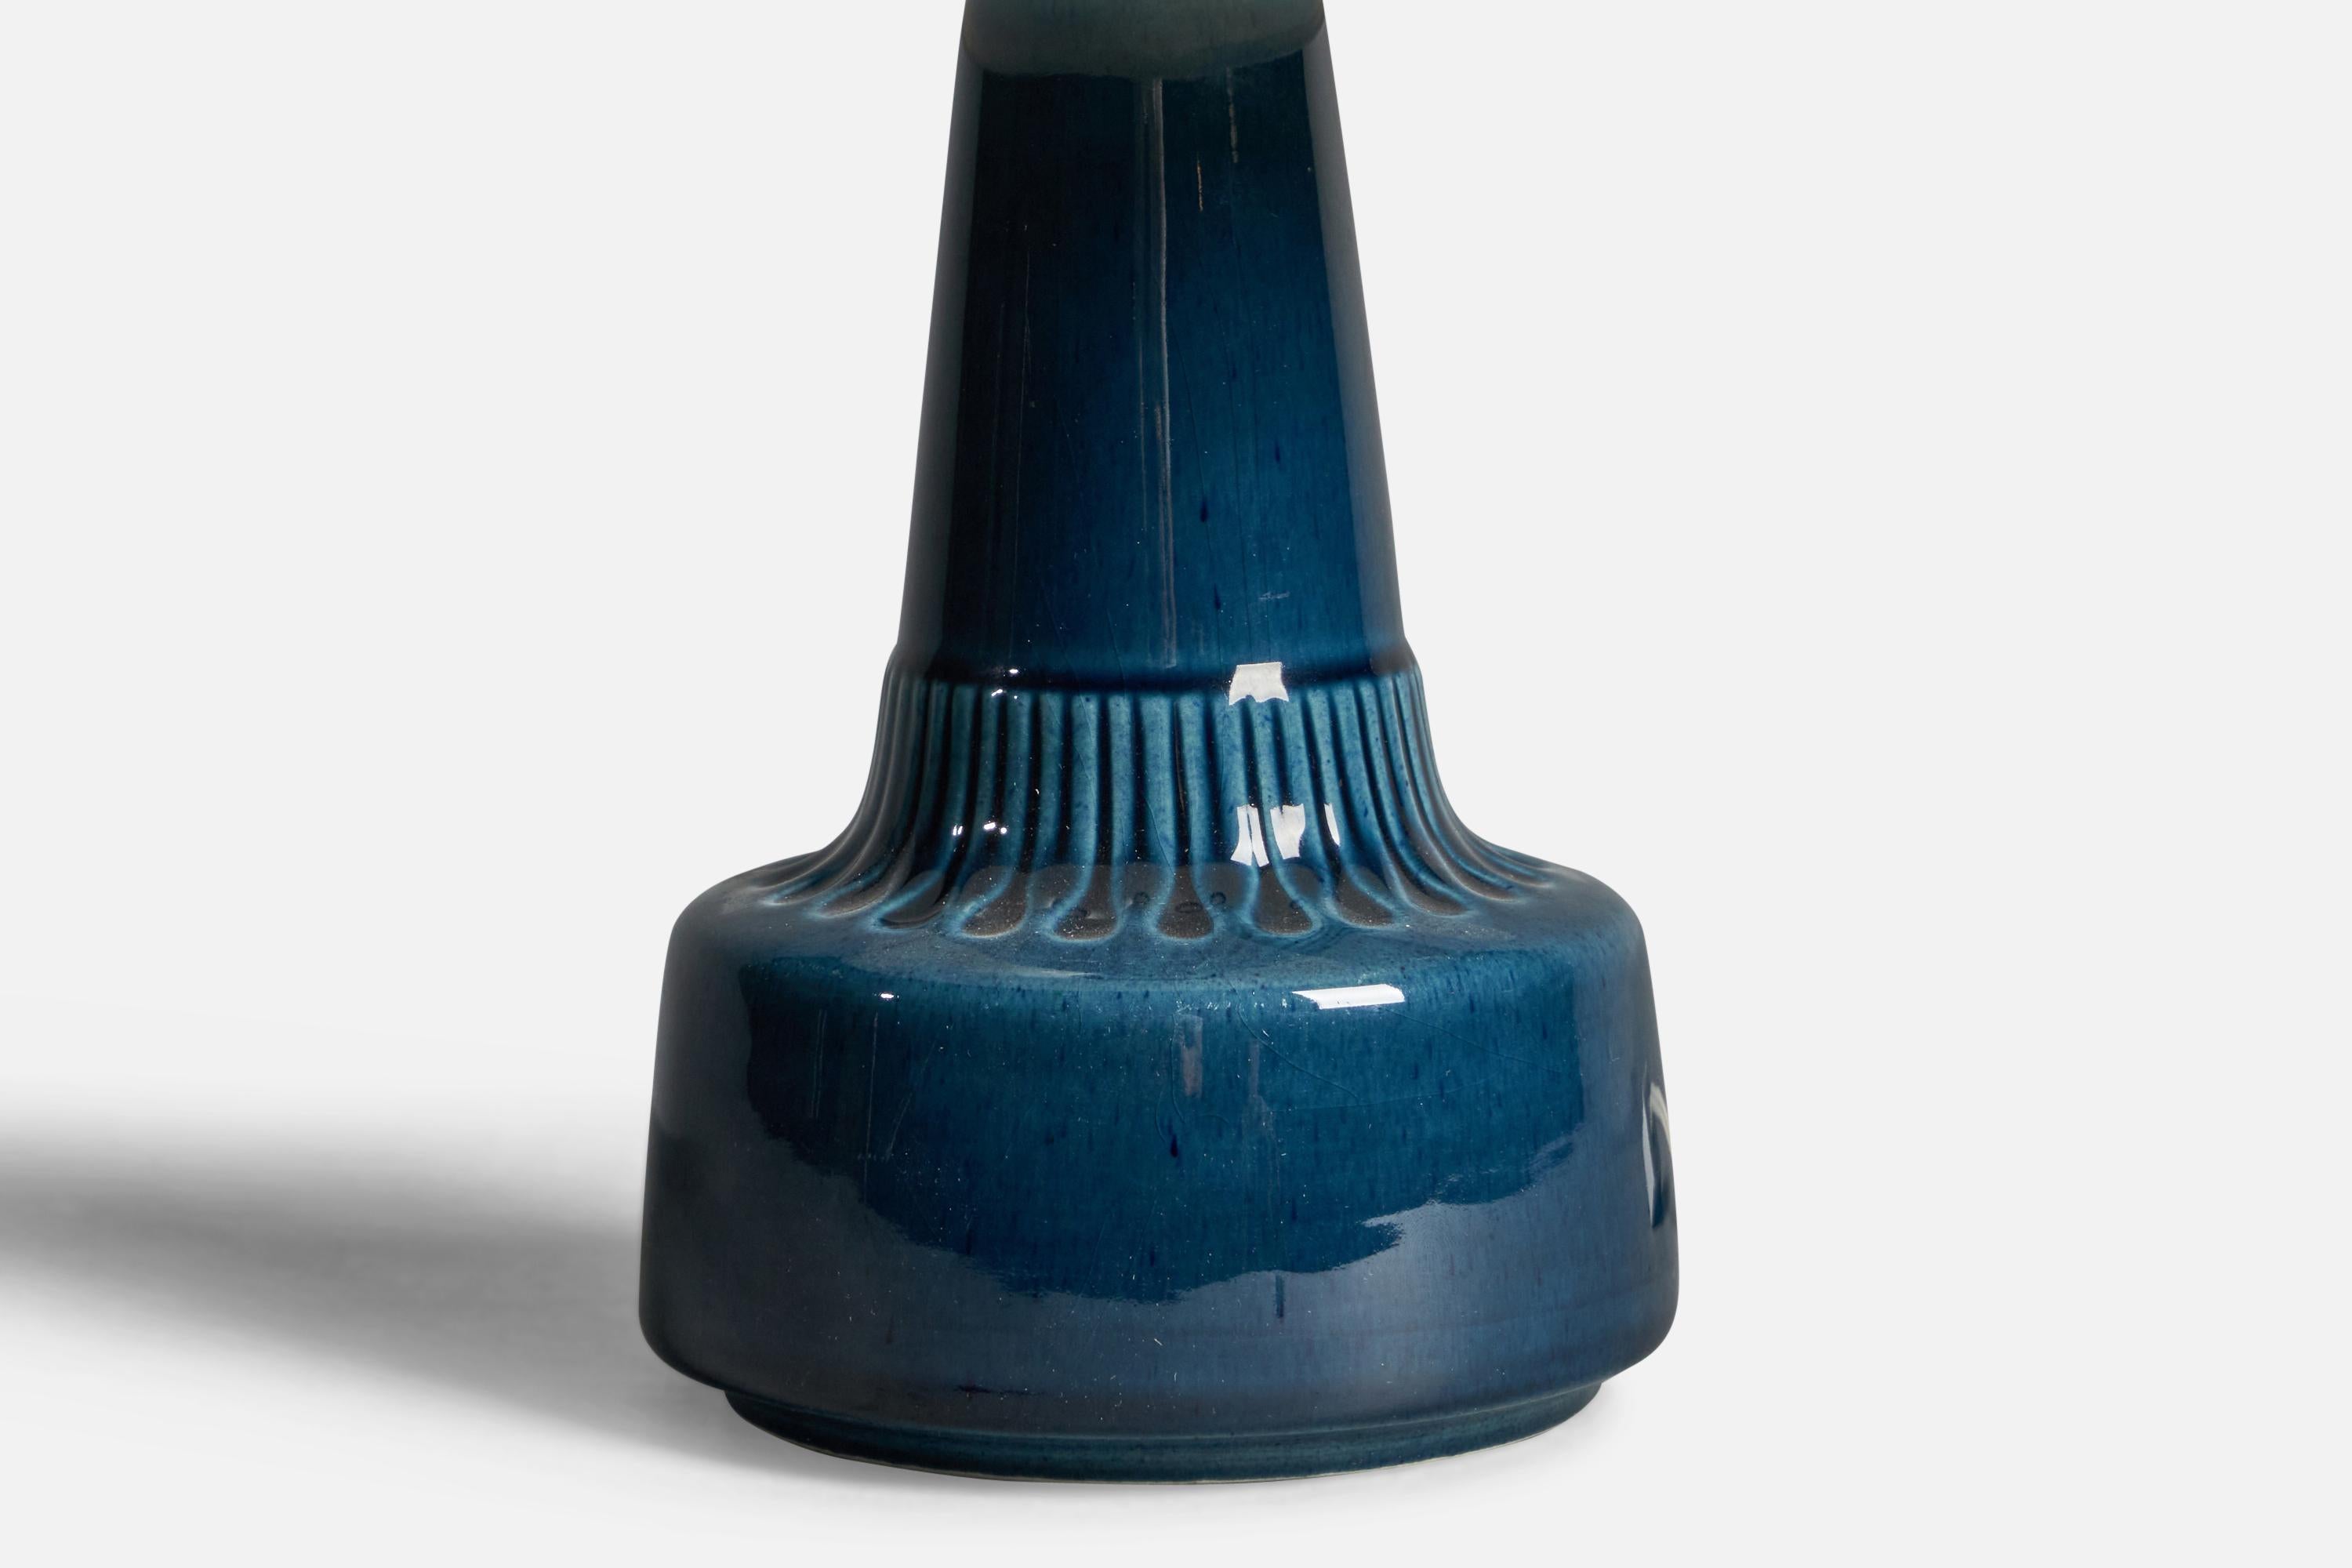 A blue-glazed stoneware table lamp designed and produced by  Søholm, Bornholm, Denmark, 1960s.

Dimensions of Lamp (inches): 9